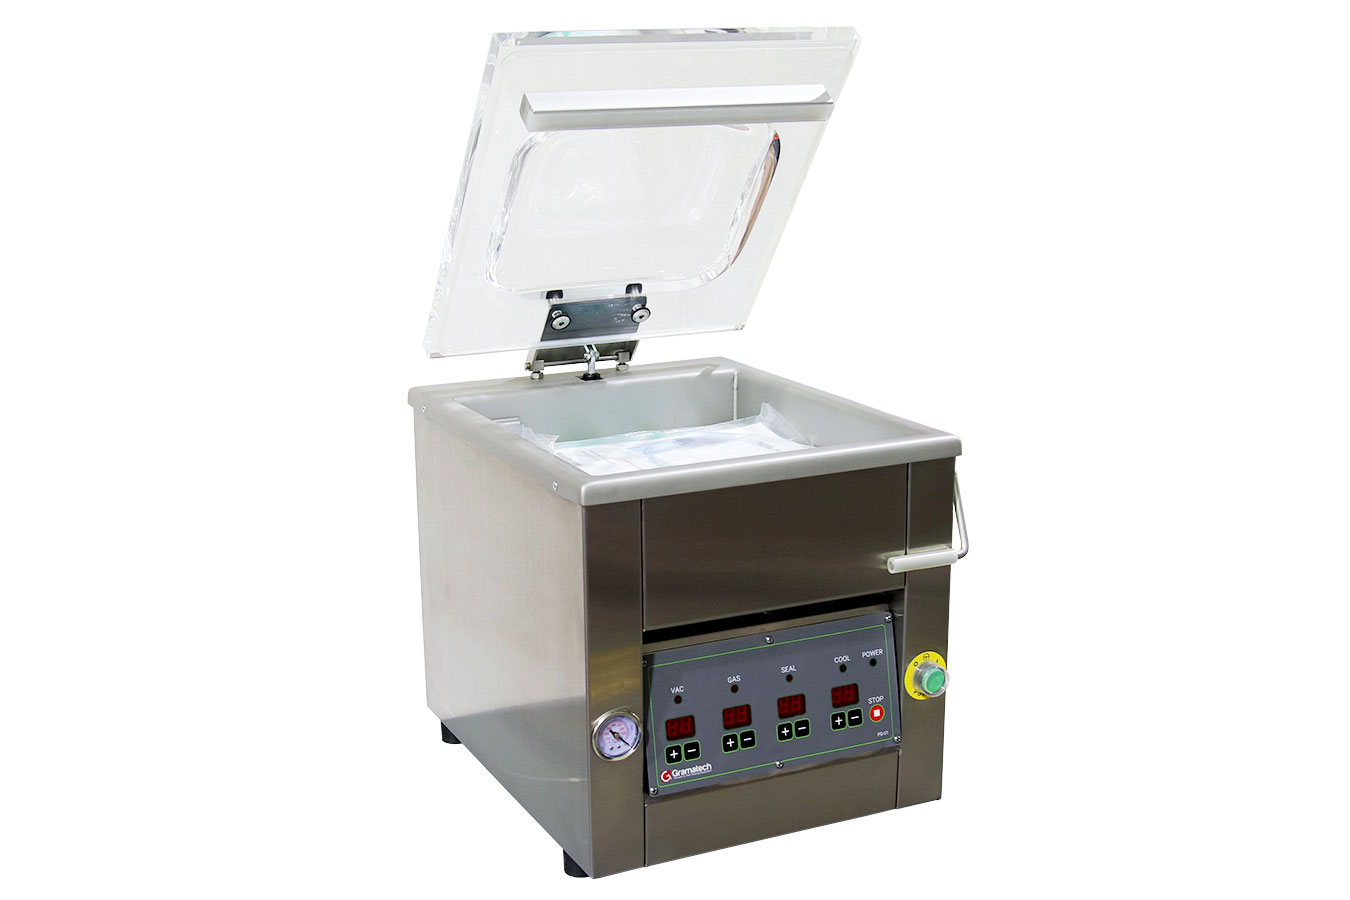 CHTC-520LR - Tabletop Chamber Sealers